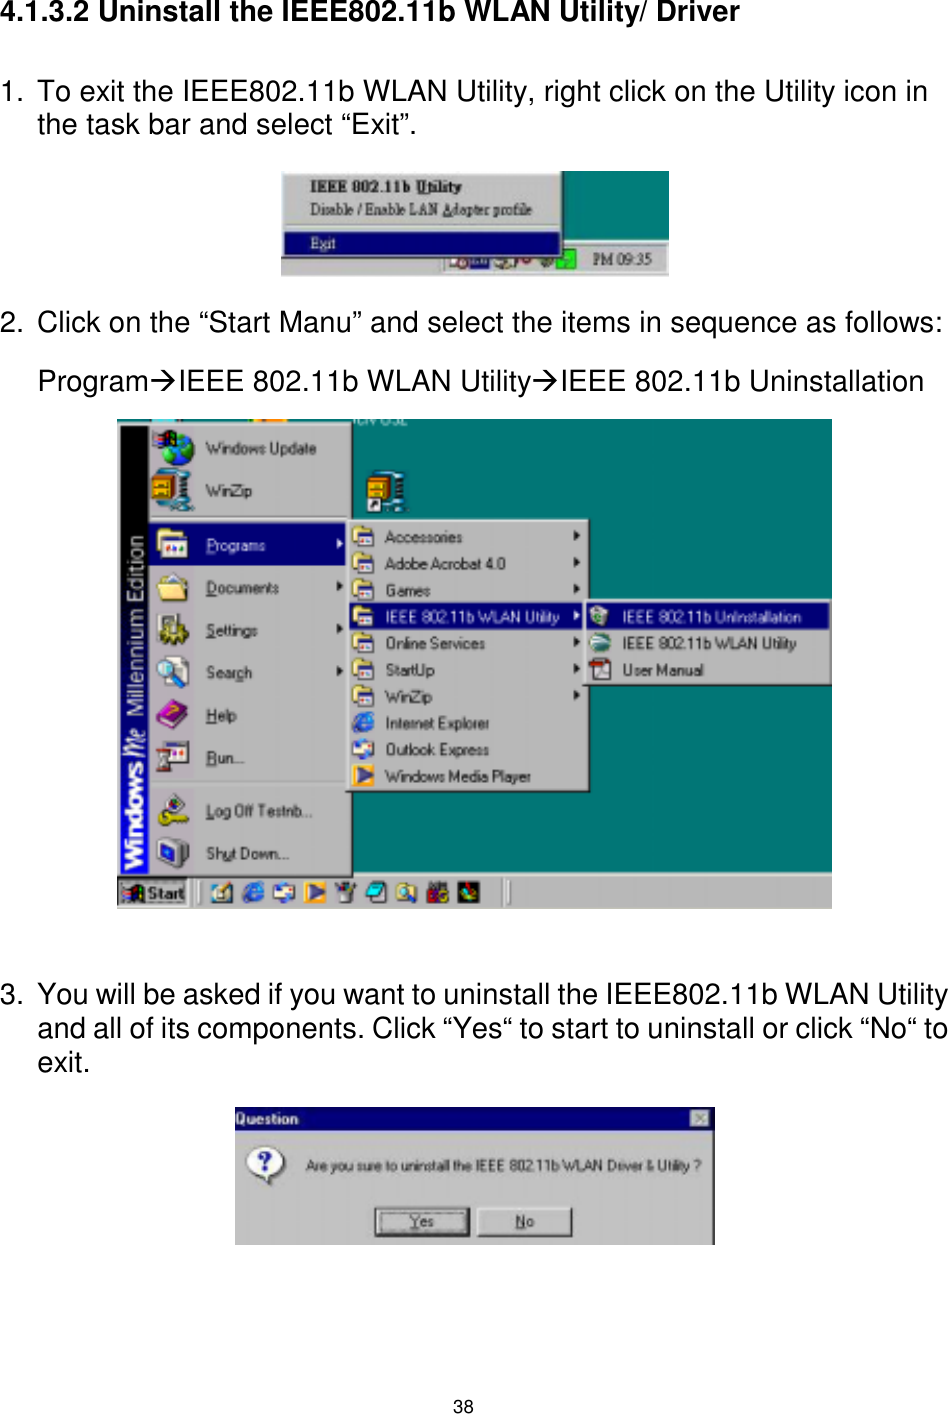  38 4.1.3.2 Uninstall the IEEE802.11b WLAN Utility/ Driver  1.  To exit the IEEE802.11b WLAN Utility, right click on the Utility icon in the task bar and select “Exit”.    2.  Click on the “Start Manu” and select the items in sequence as follows: Program#IEEE 802.11b WLAN Utility#IEEE 802.11b Uninstallation             3.  You will be asked if you want to uninstall the IEEE802.11b WLAN Utility and all of its components. Click “Yes“ to start to uninstall or click “No“ to exit.      